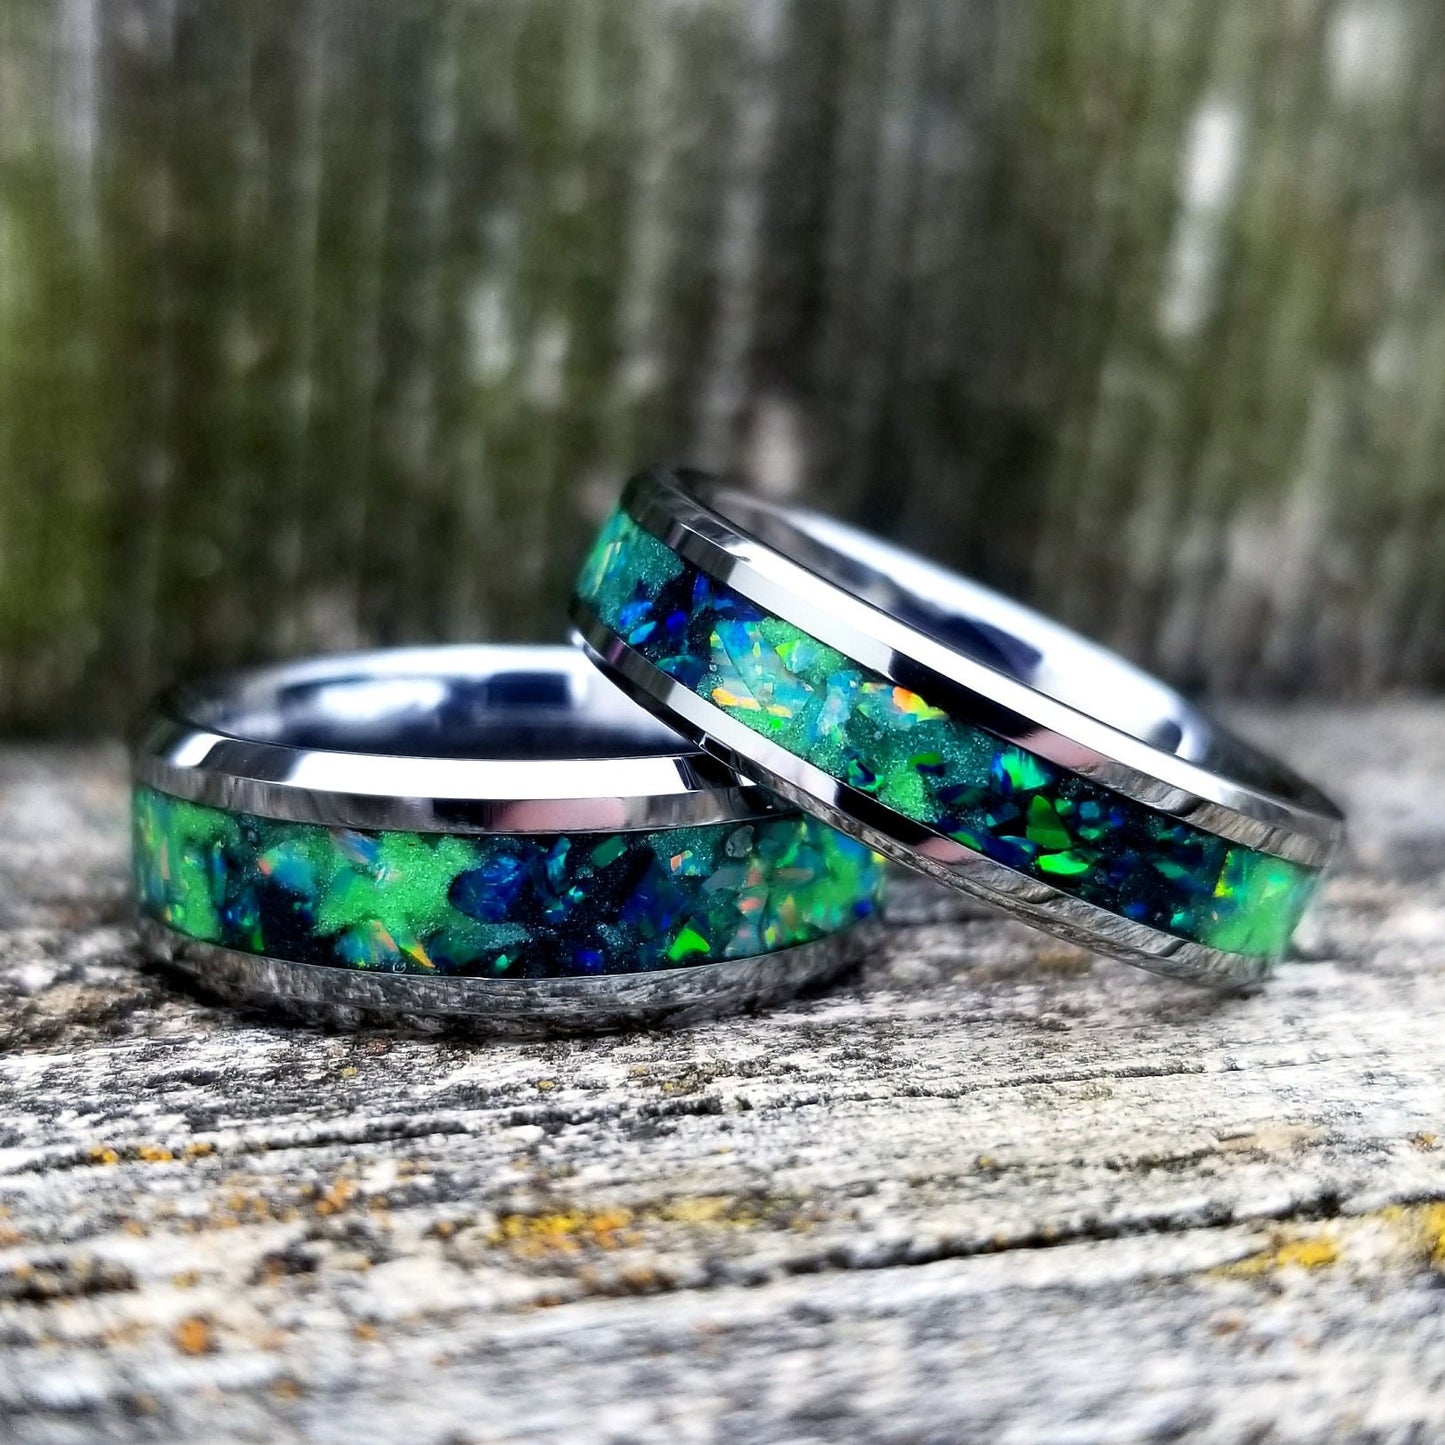 His and Hers wedding ring set. Galaxy fire opal ring. Tungsten carbide glow ring set with green opal and jade fire opal inlay. Sizes 5-13